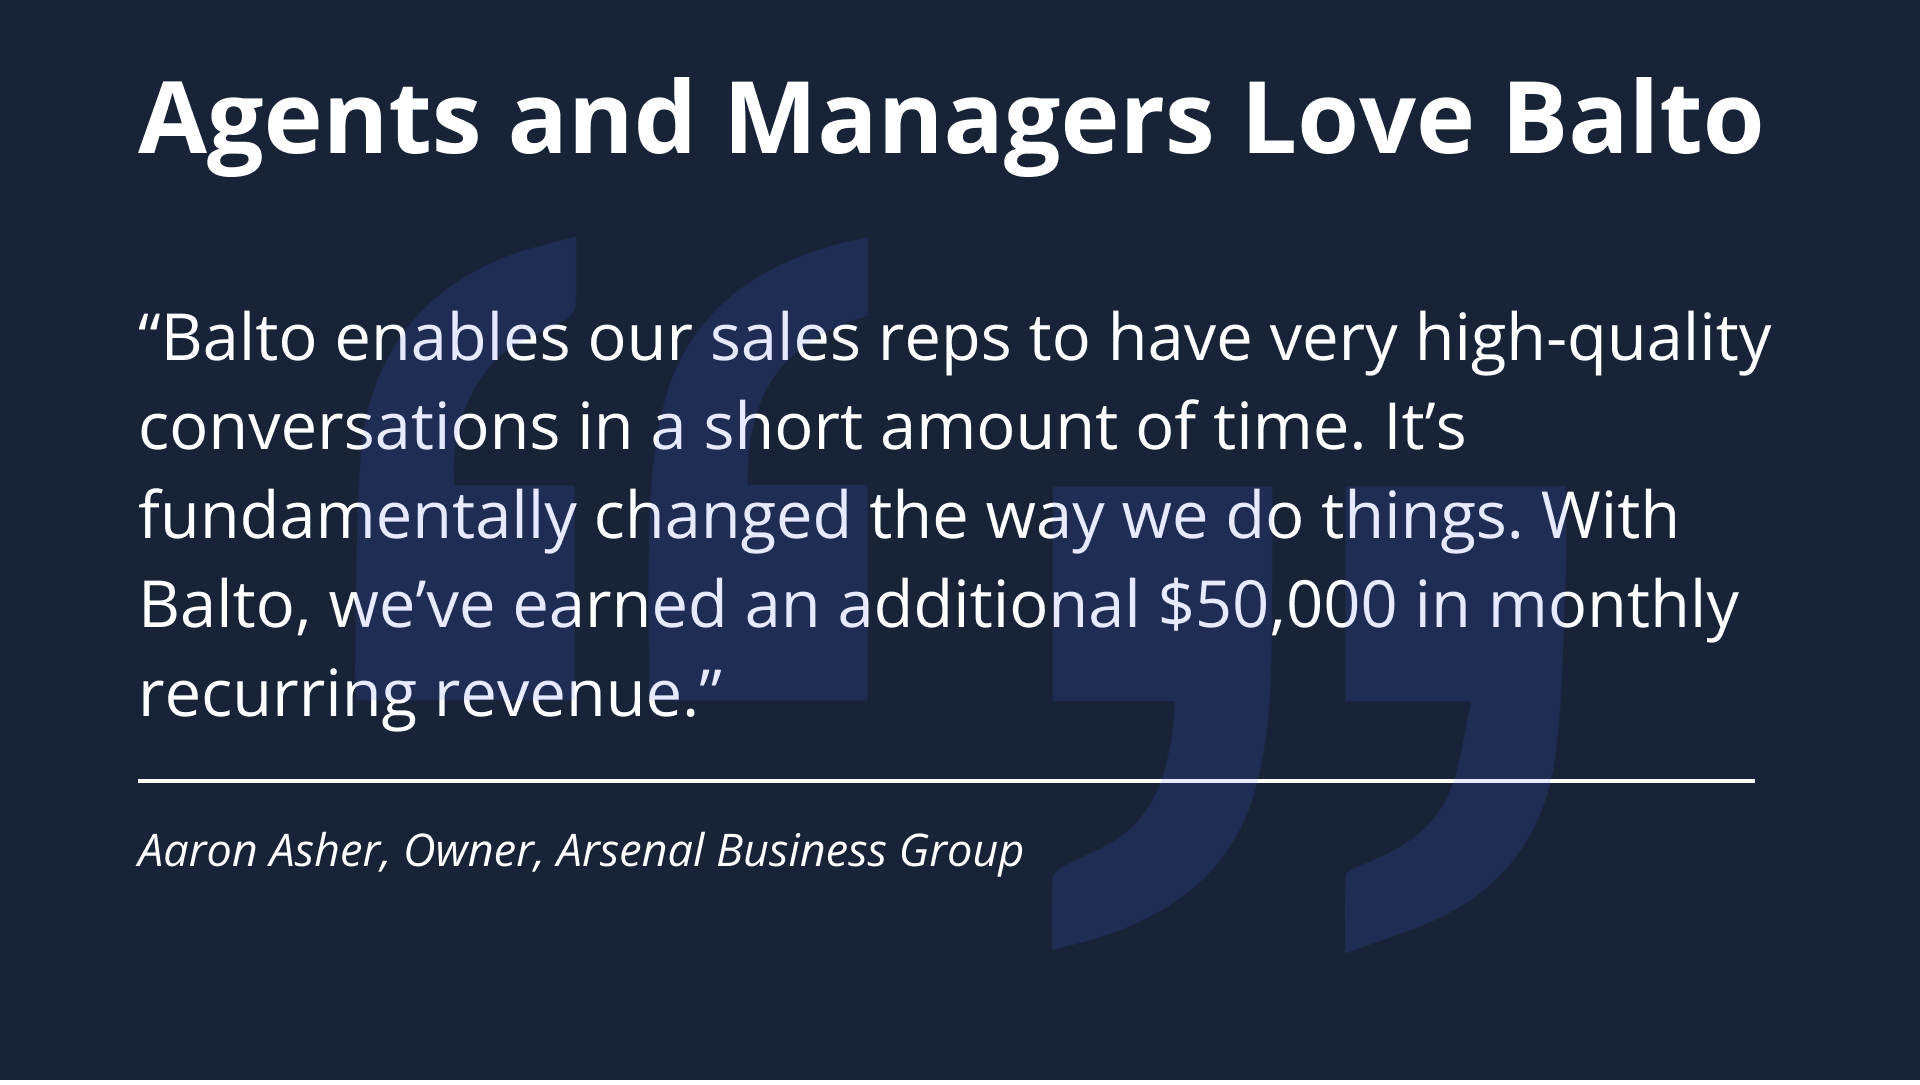 “Balto enables our sales reps to have very high-quality conversations in a short amount of time. It’s fundamentally changed the way we do things...”

Aaron Asher, Owner, Arsenal Business Group